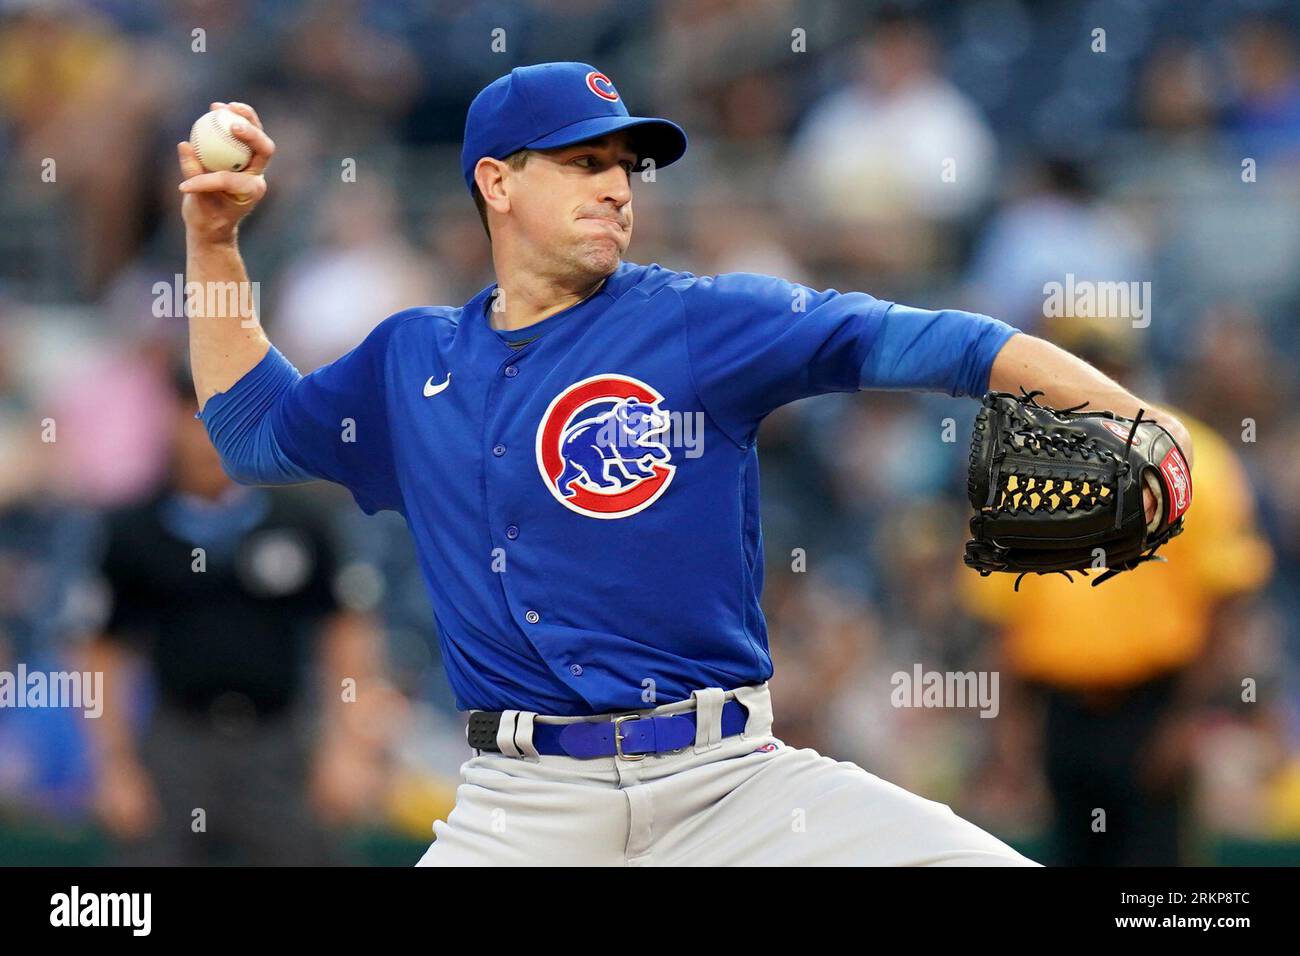 Chicago Cubs starting pitcher Kyle Hendricks delivers against the